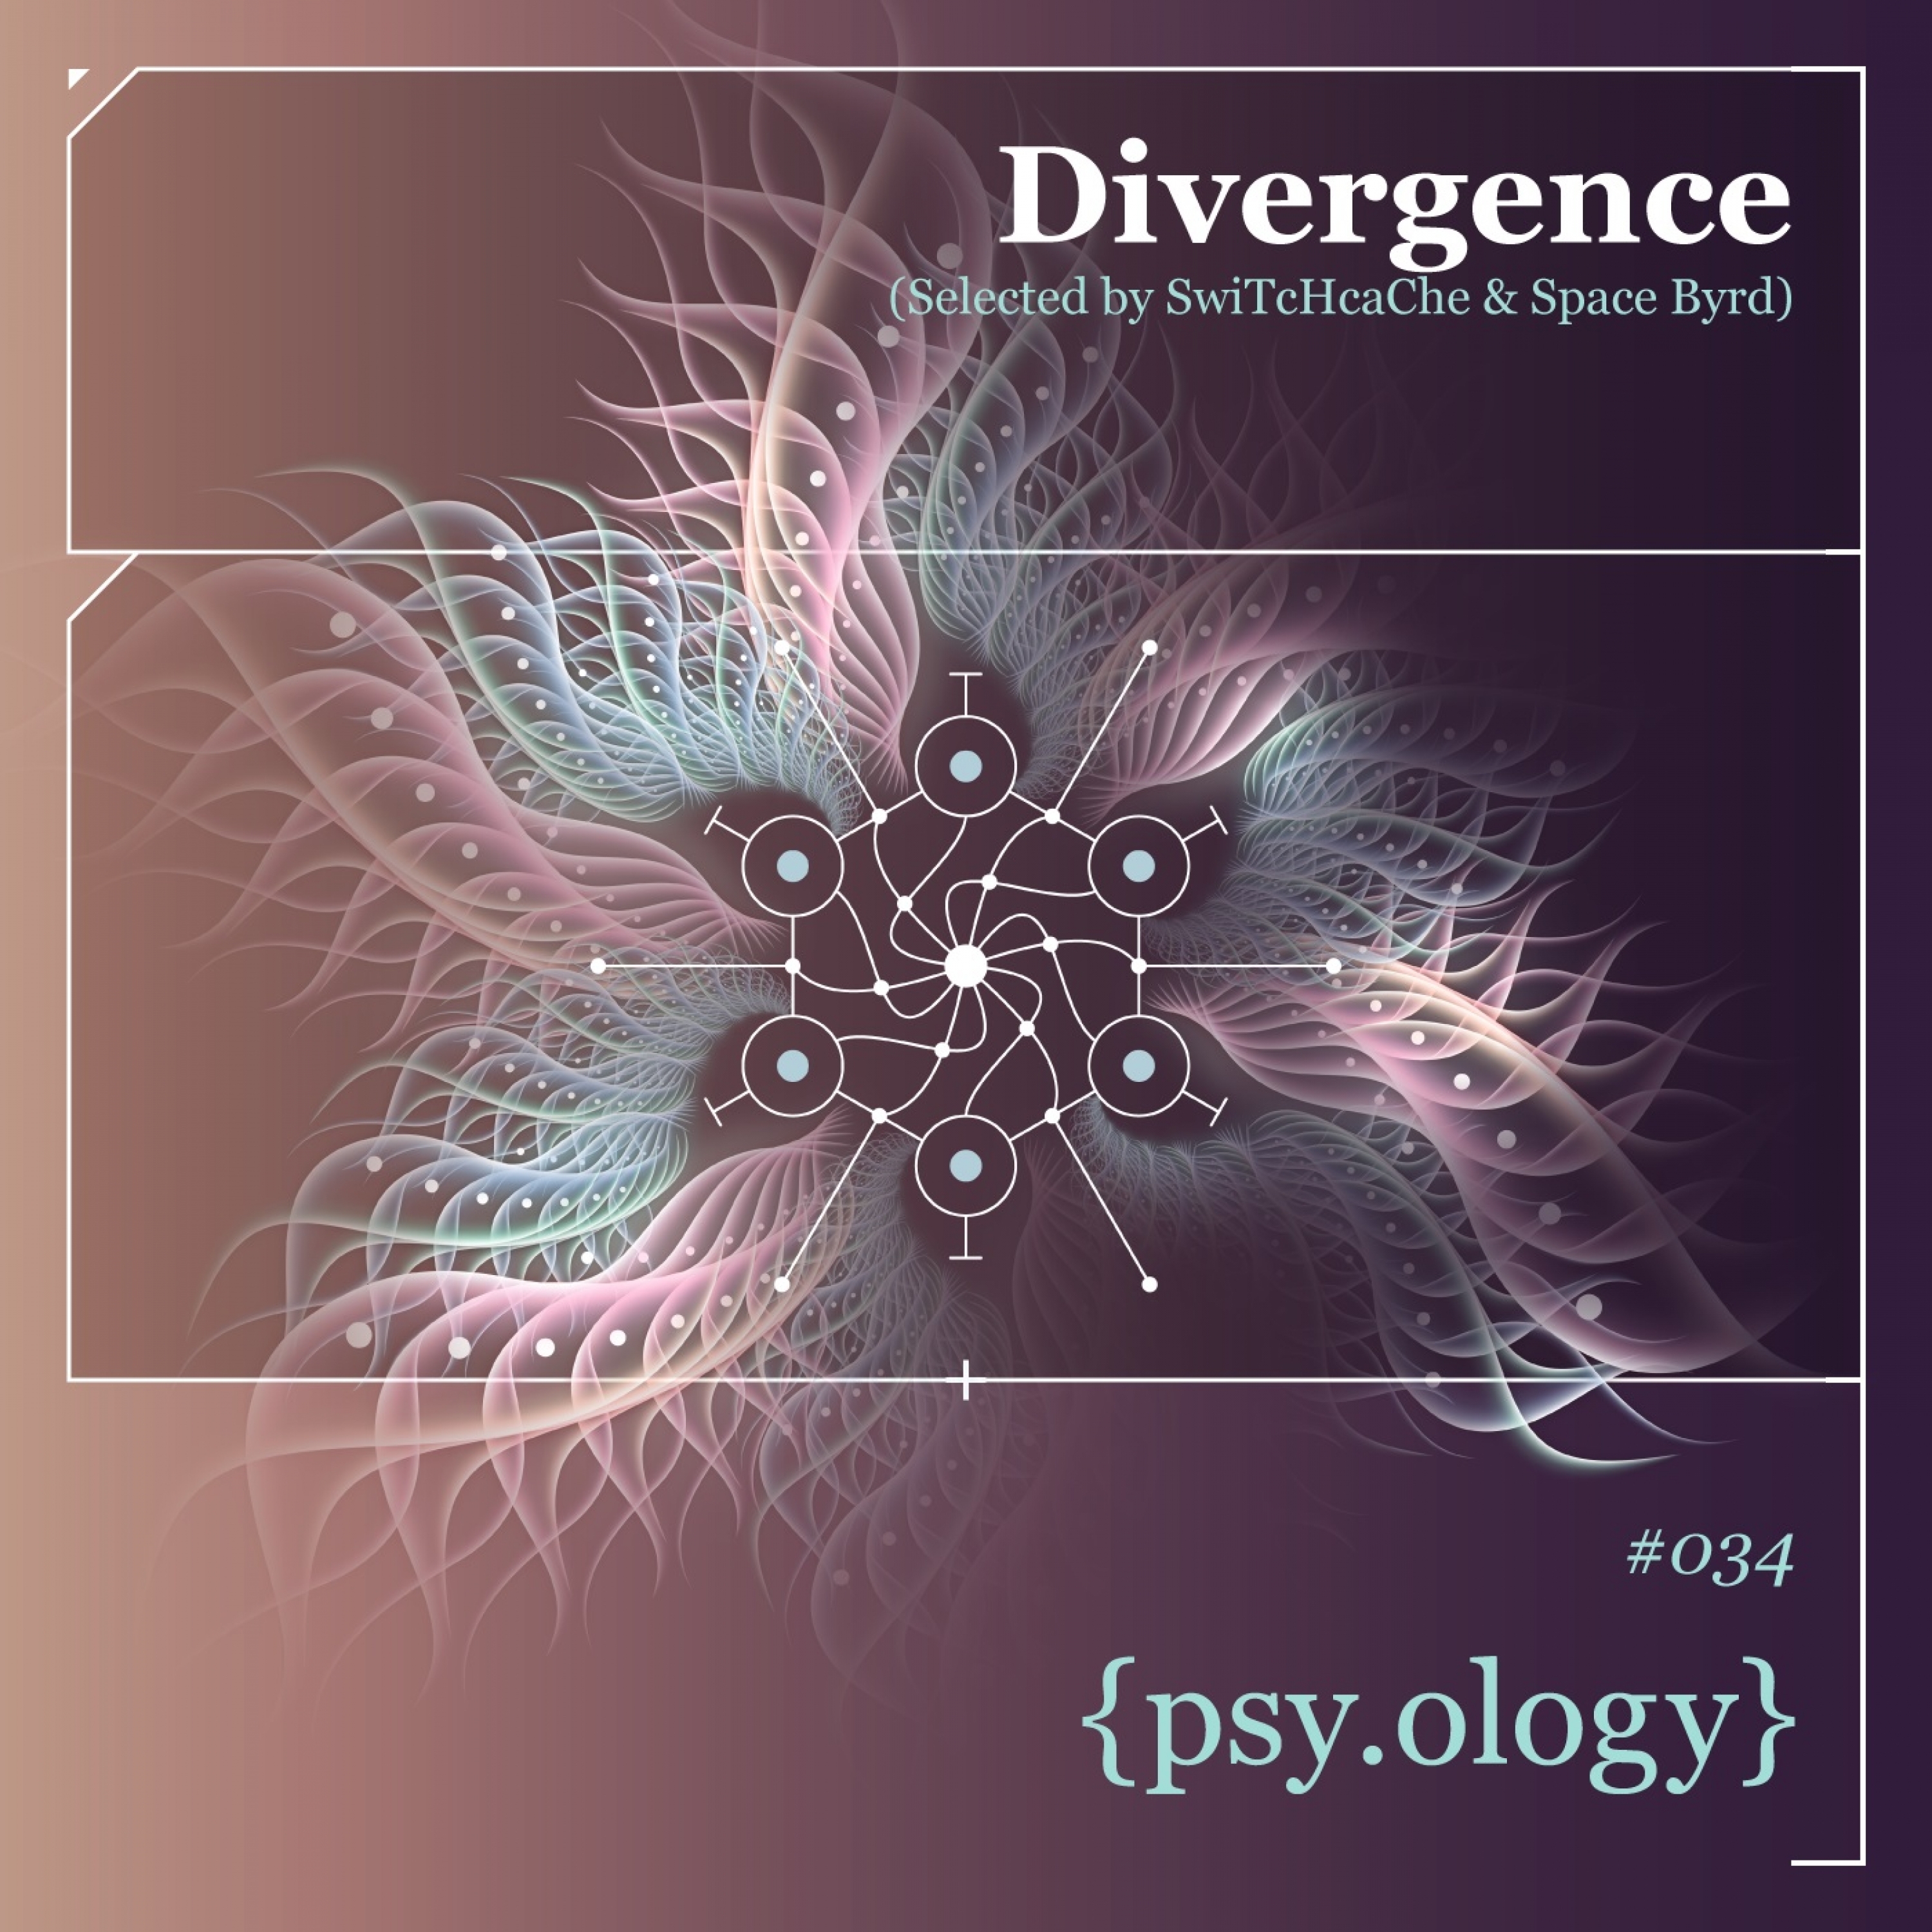 Divergence (Selected by Switchcache & Space Byrd)